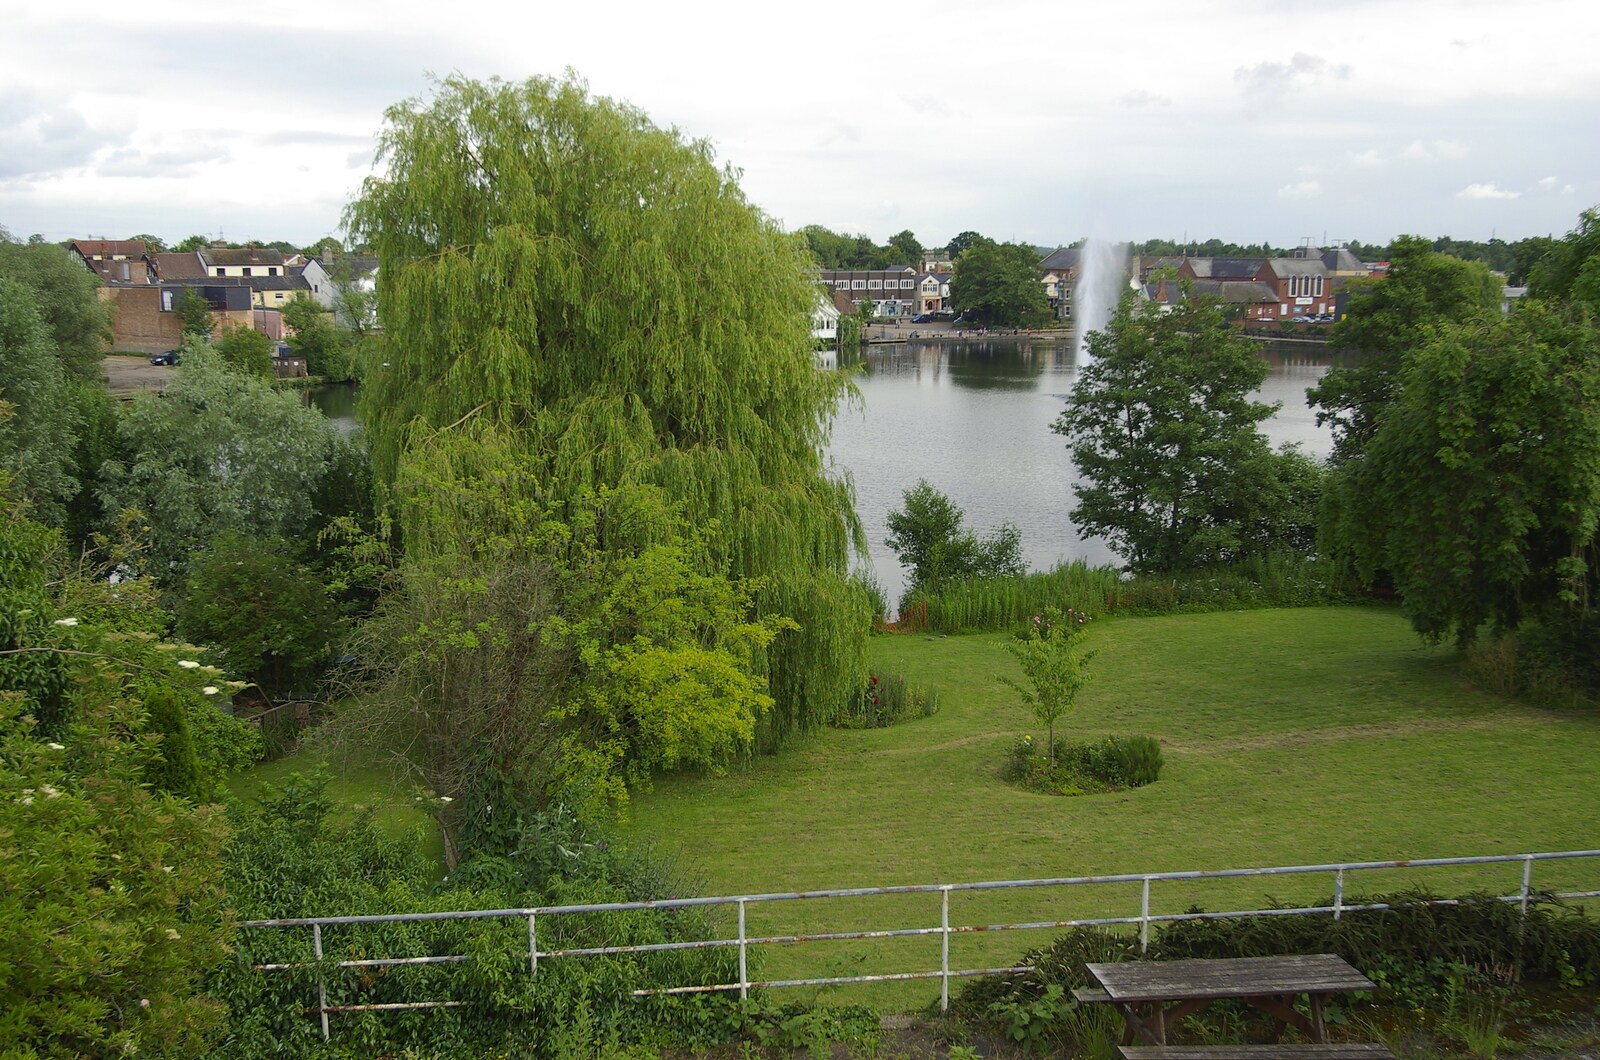 A view of the Mere from Denmark Street from Diss Carnival Procession, Diss, Norfolk - 21st June 2009